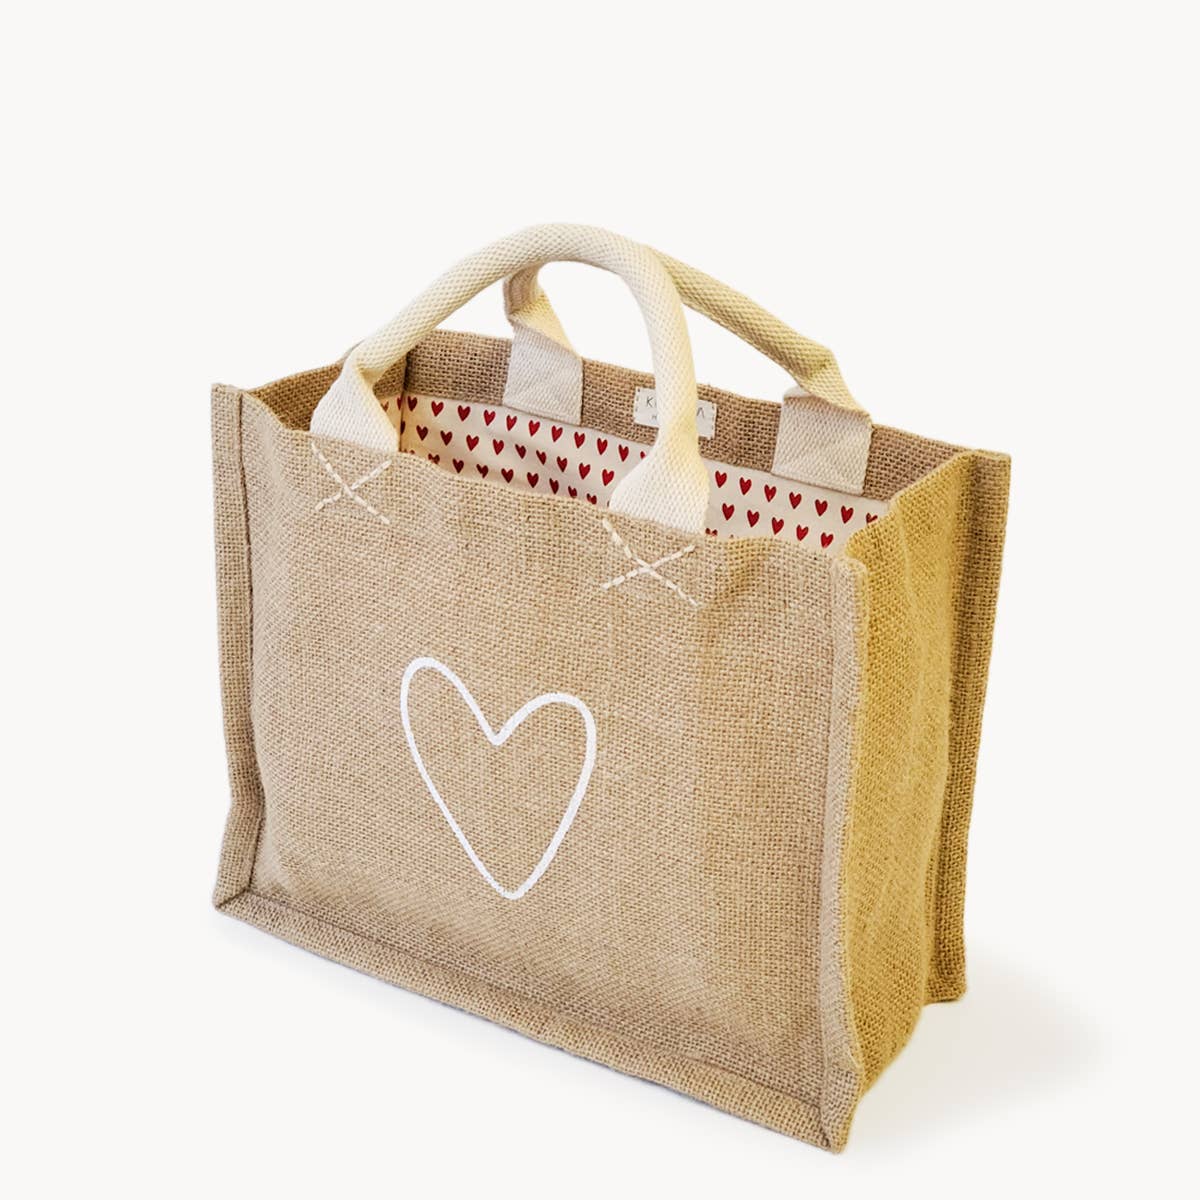 UK Coloured Jute Bags - Wholesale and UK Delivery